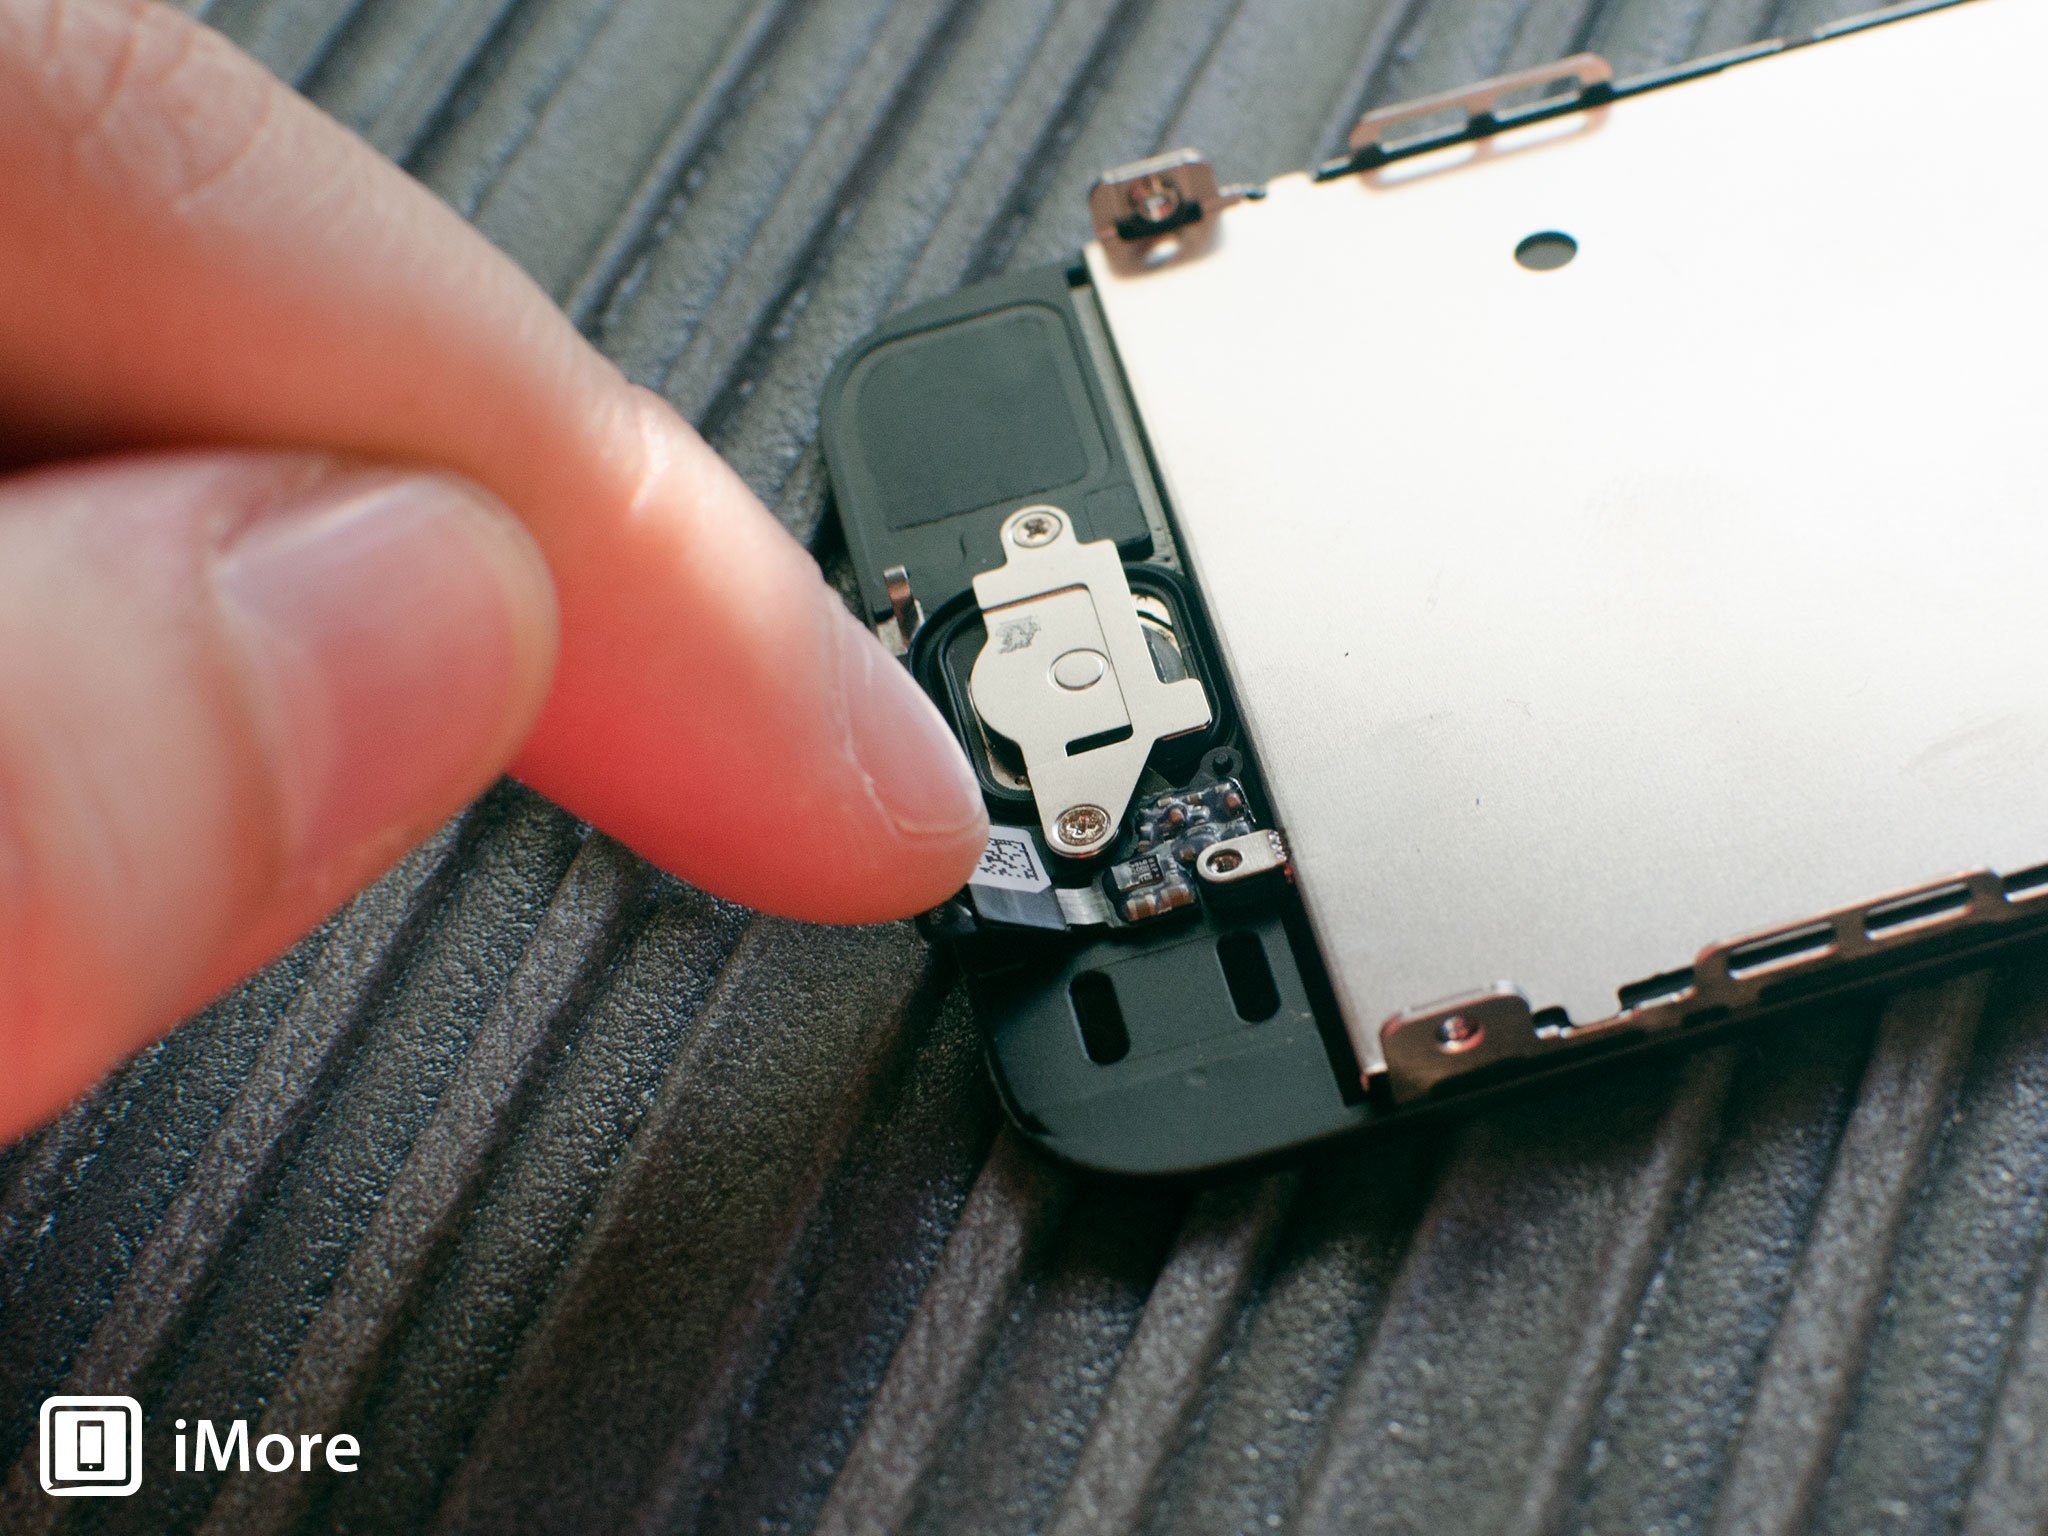 Our first look at the Touch ID sensor itself, on the back side of the display assembly